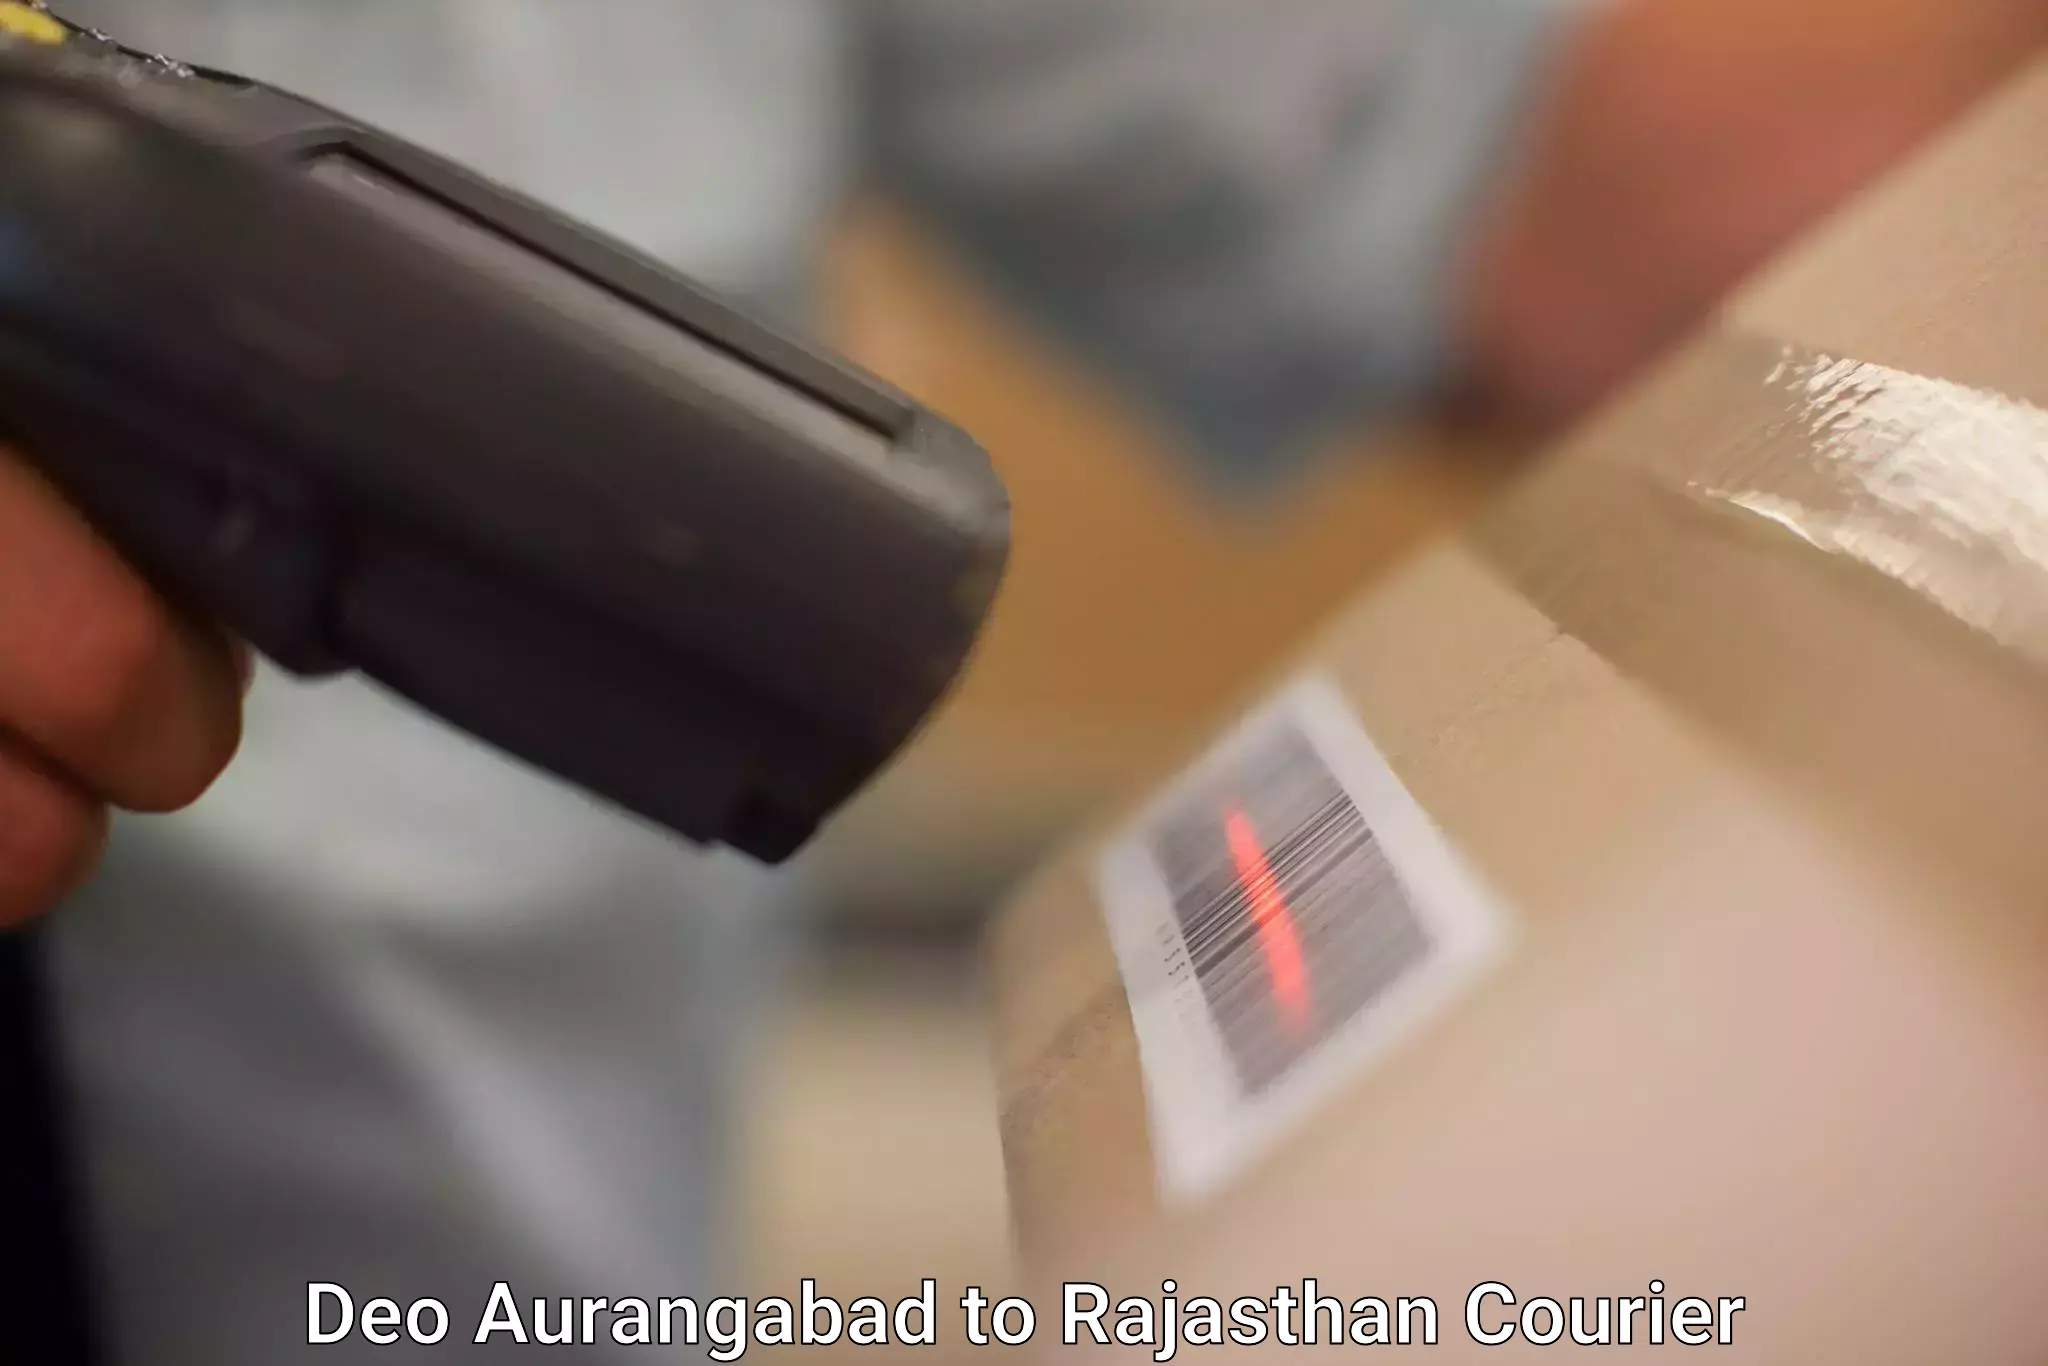 User-friendly courier app Deo Aurangabad to Rajasthan